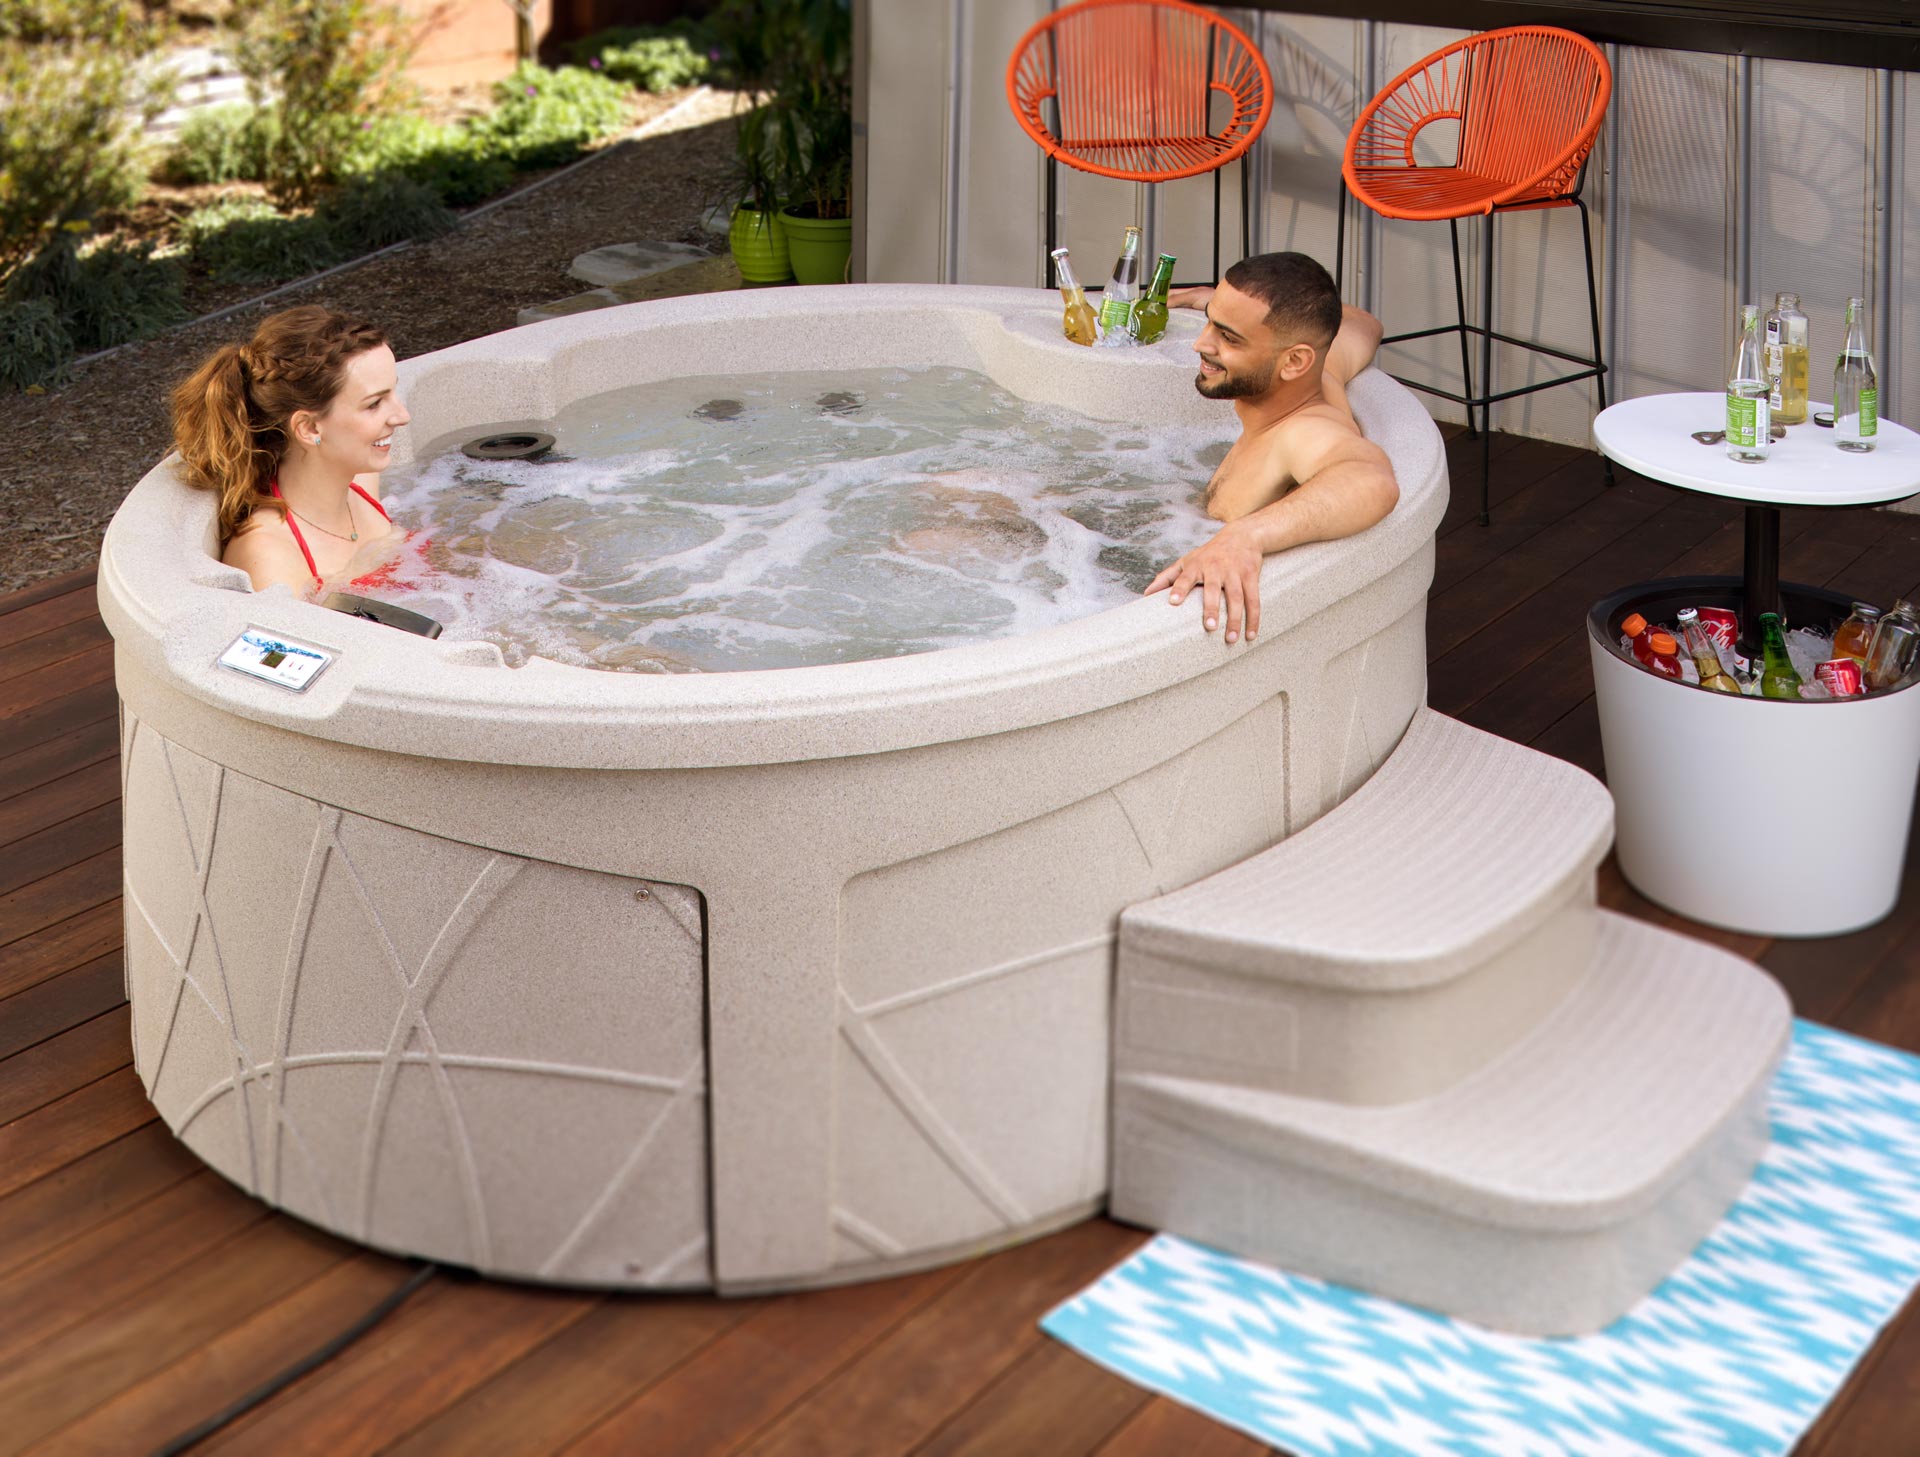 Hot Tub Financing With Bad Credit | Rent to Own Hot Tubs | ShopEZCredit